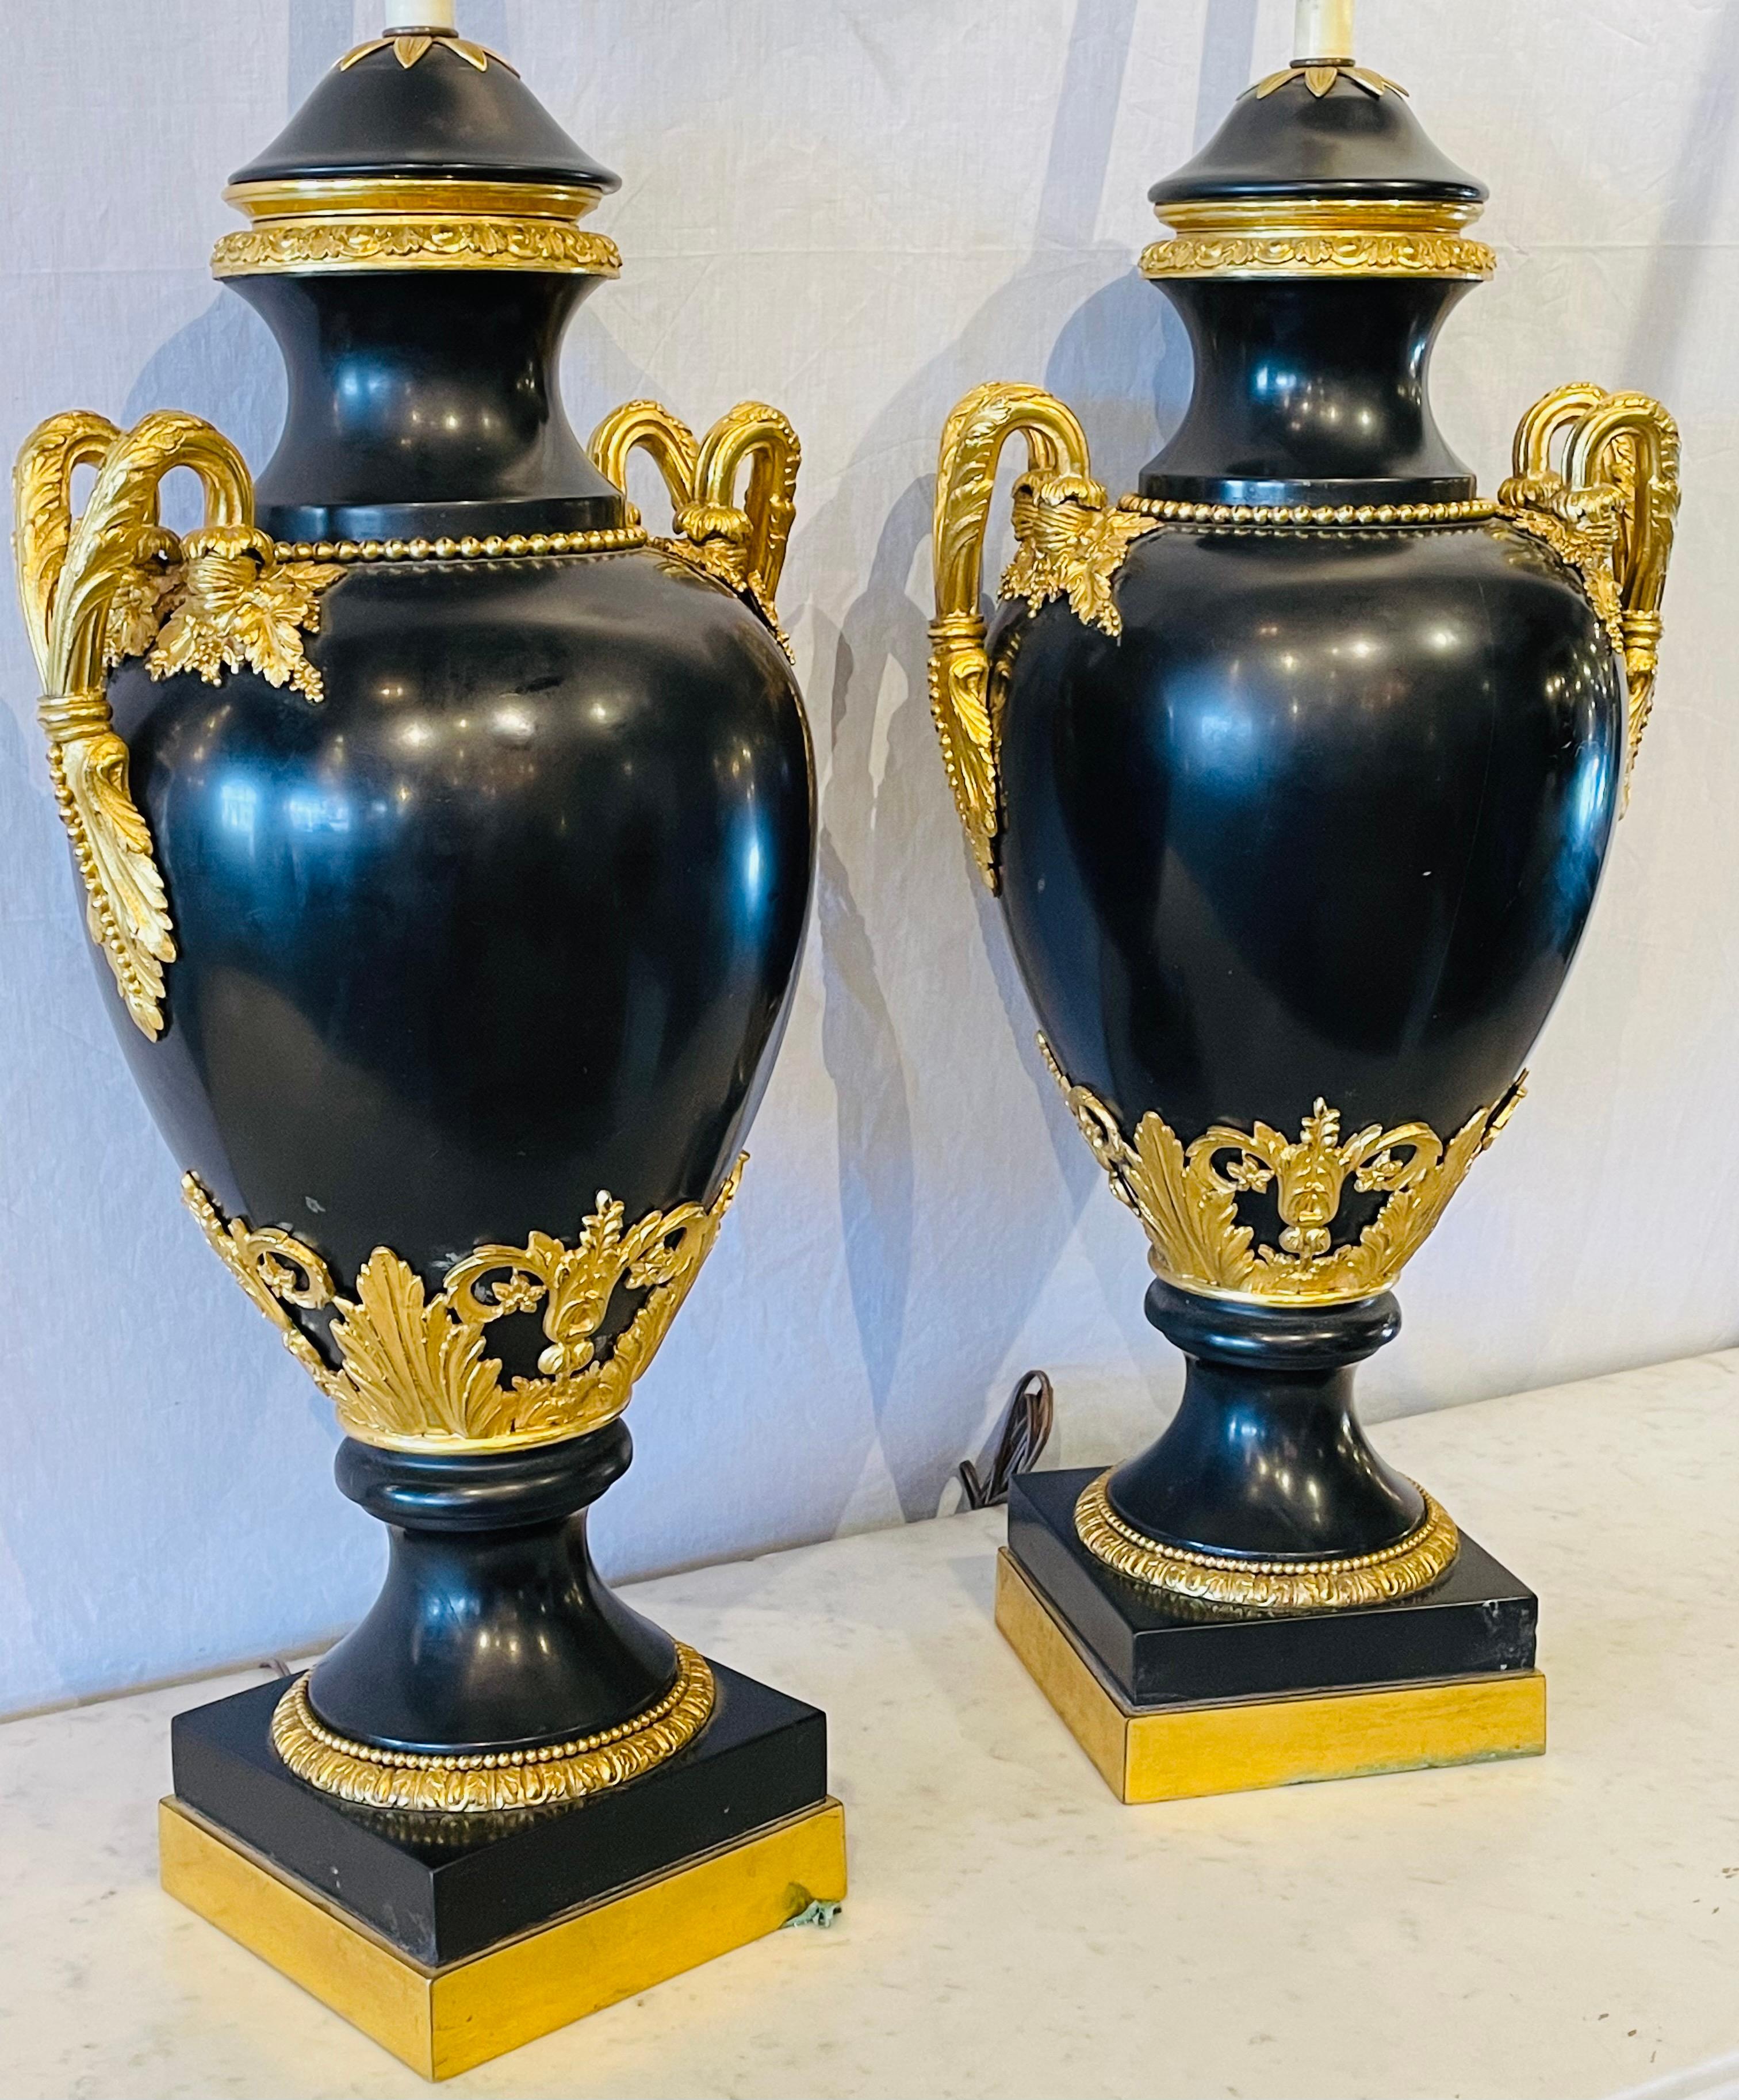 Gilt Pair of 19th Century Doré and Black Marble Table Lamps or Urns